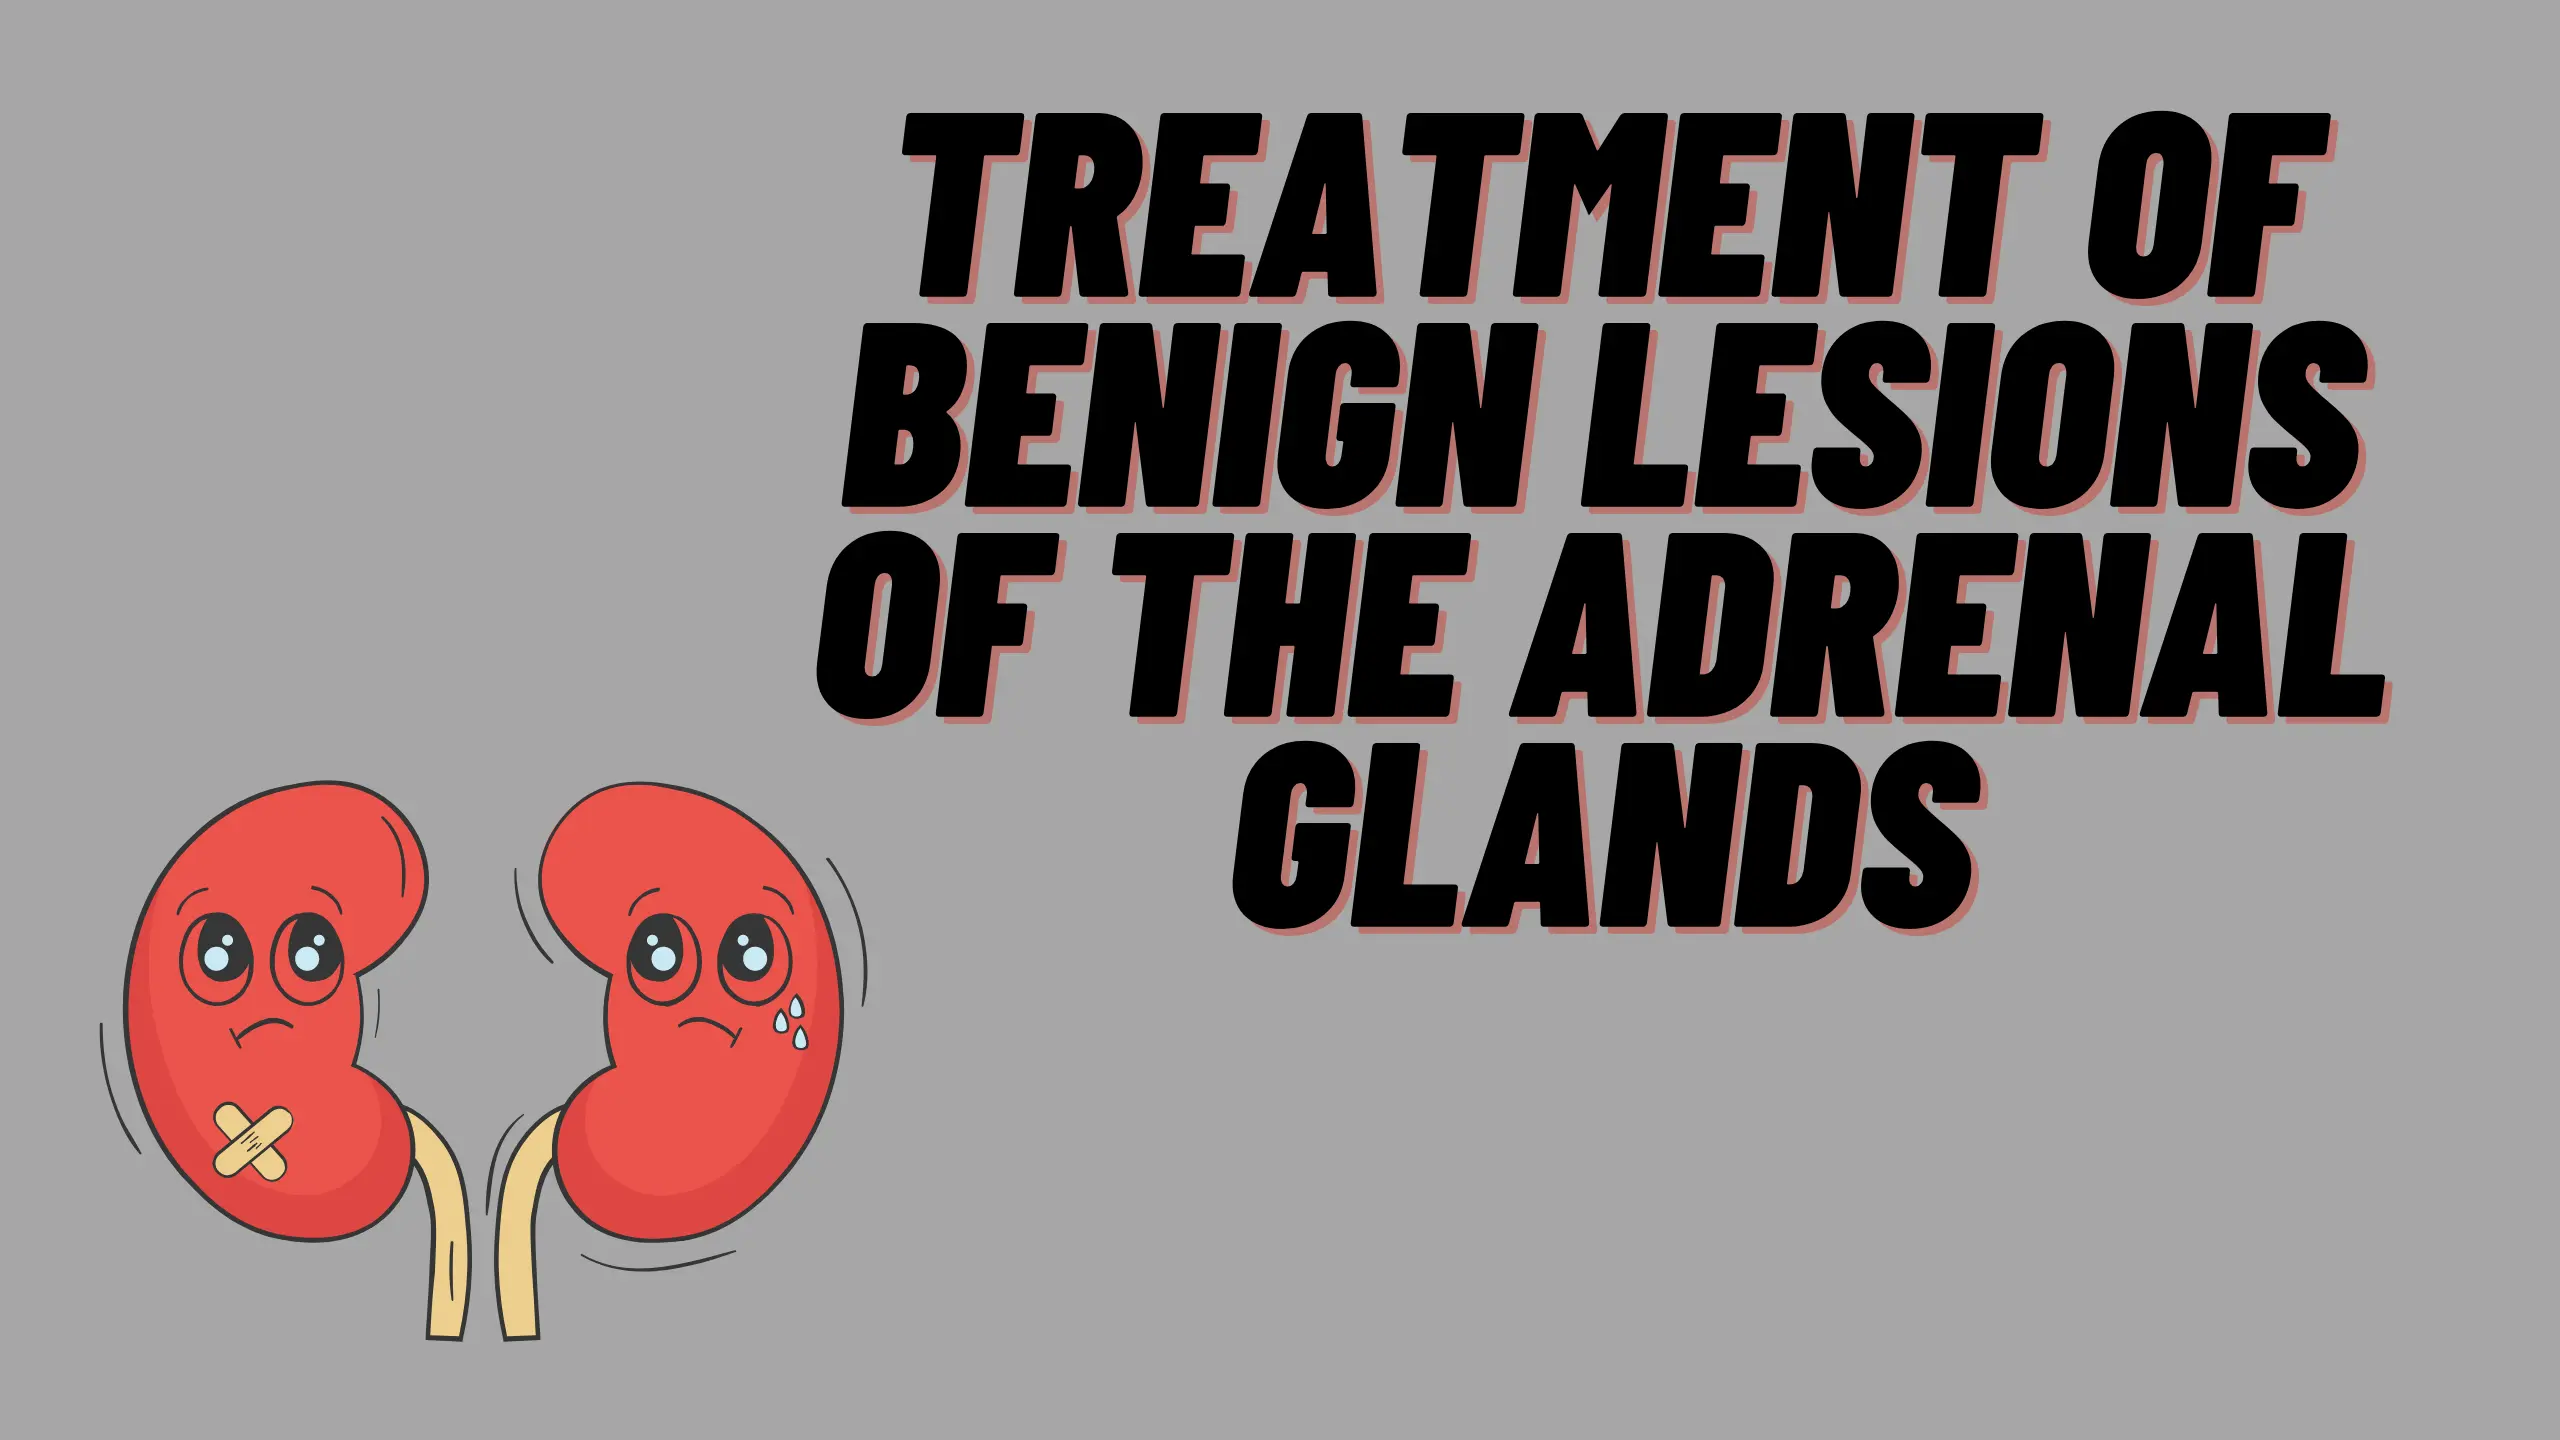 Benign Lesions of the Adrenal Glands